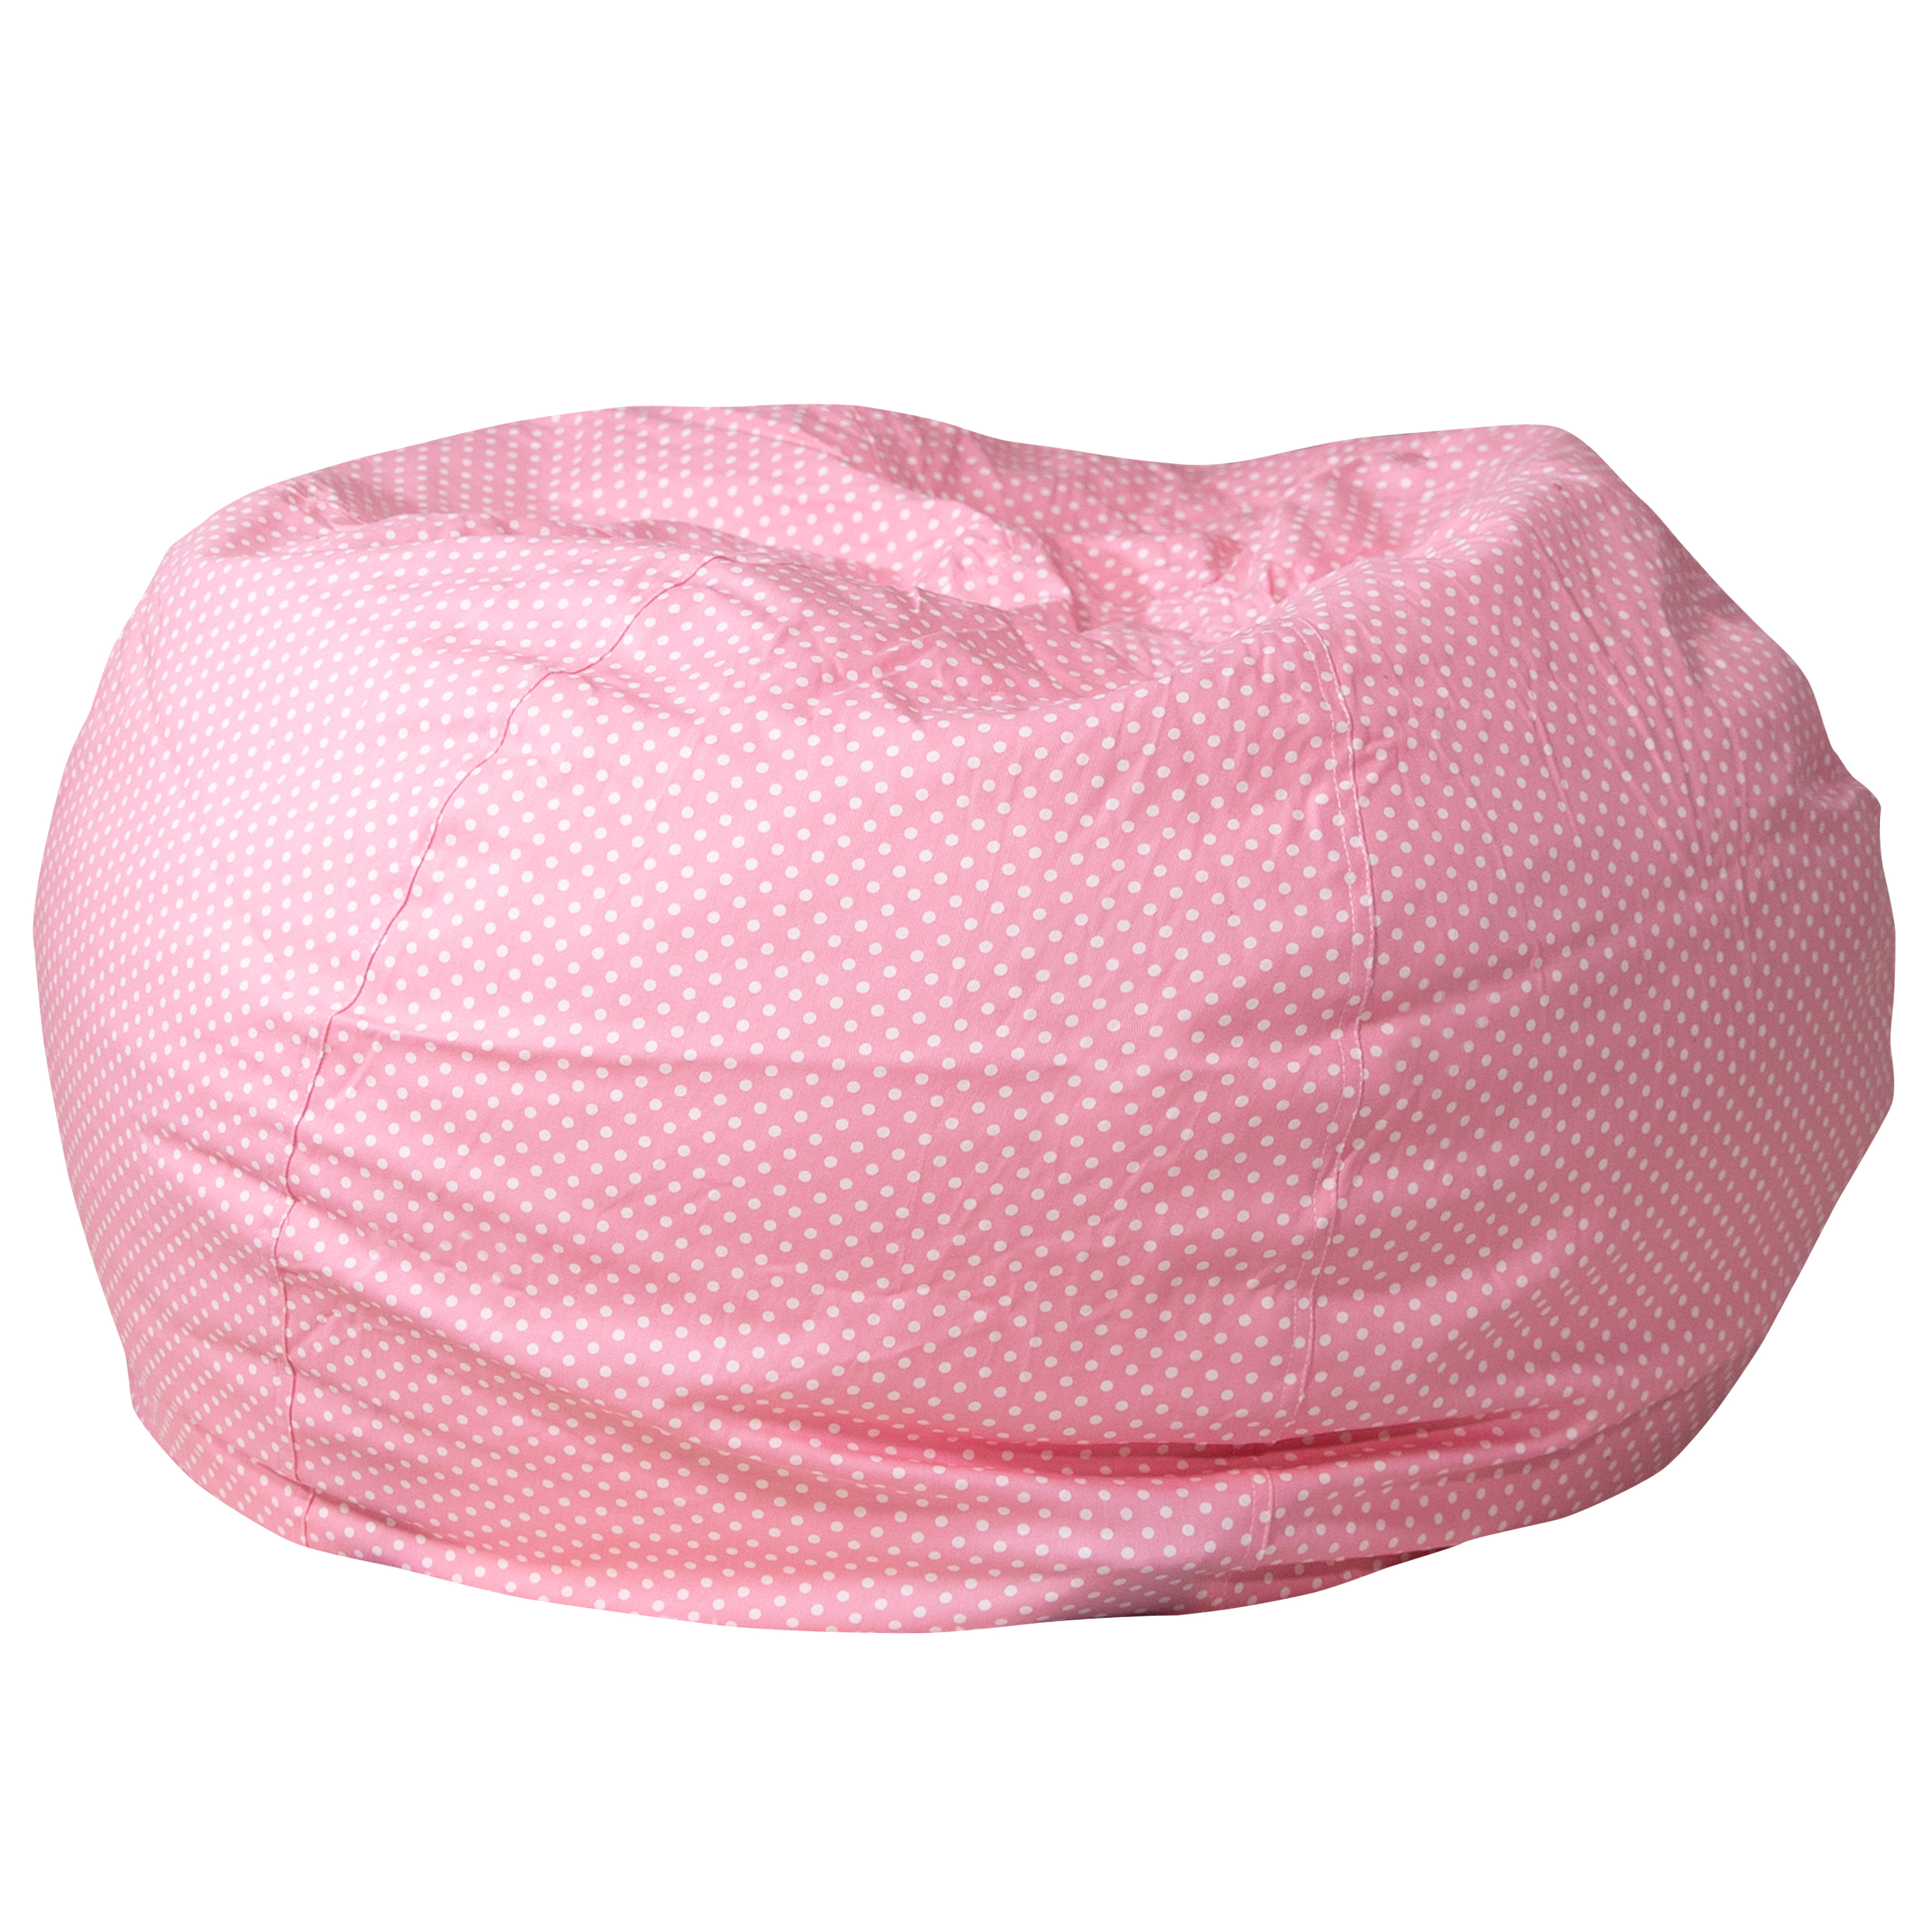 Flash Furniture Oversized Light Pink Dot Refillable Bean Bag Chair for All Ages - image 2 of 9